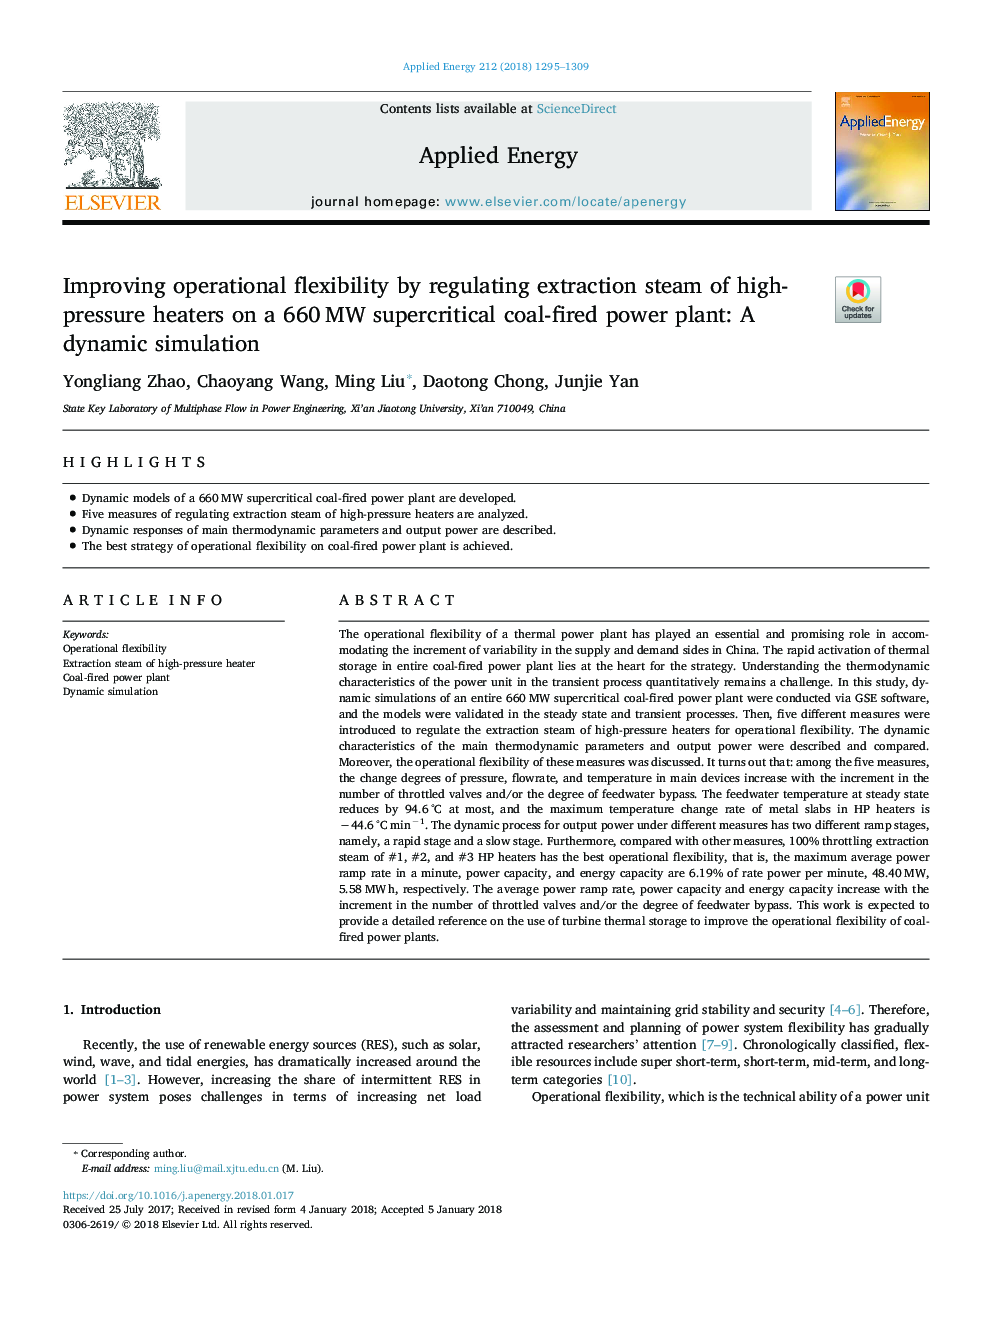 Improving operational flexibility by regulating extraction steam of high-pressure heaters on a 660â¯MW supercritical coal-fired power plant: A dynamic simulation